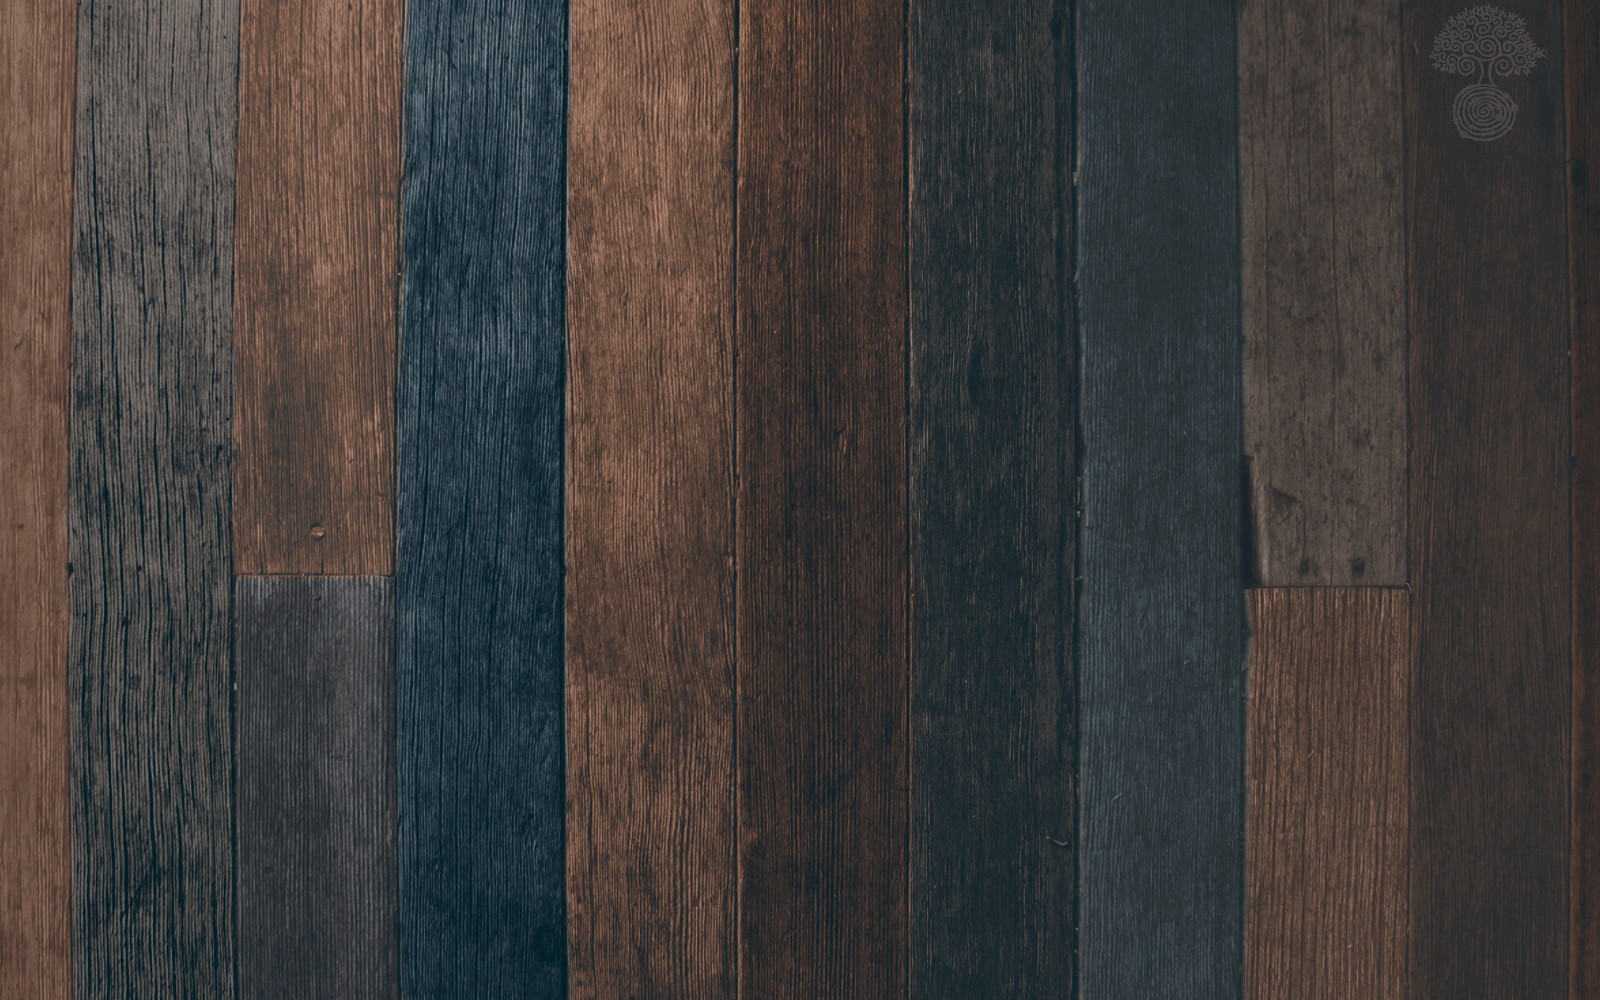 General 1600x1000 wall wooden surface minimalism texture